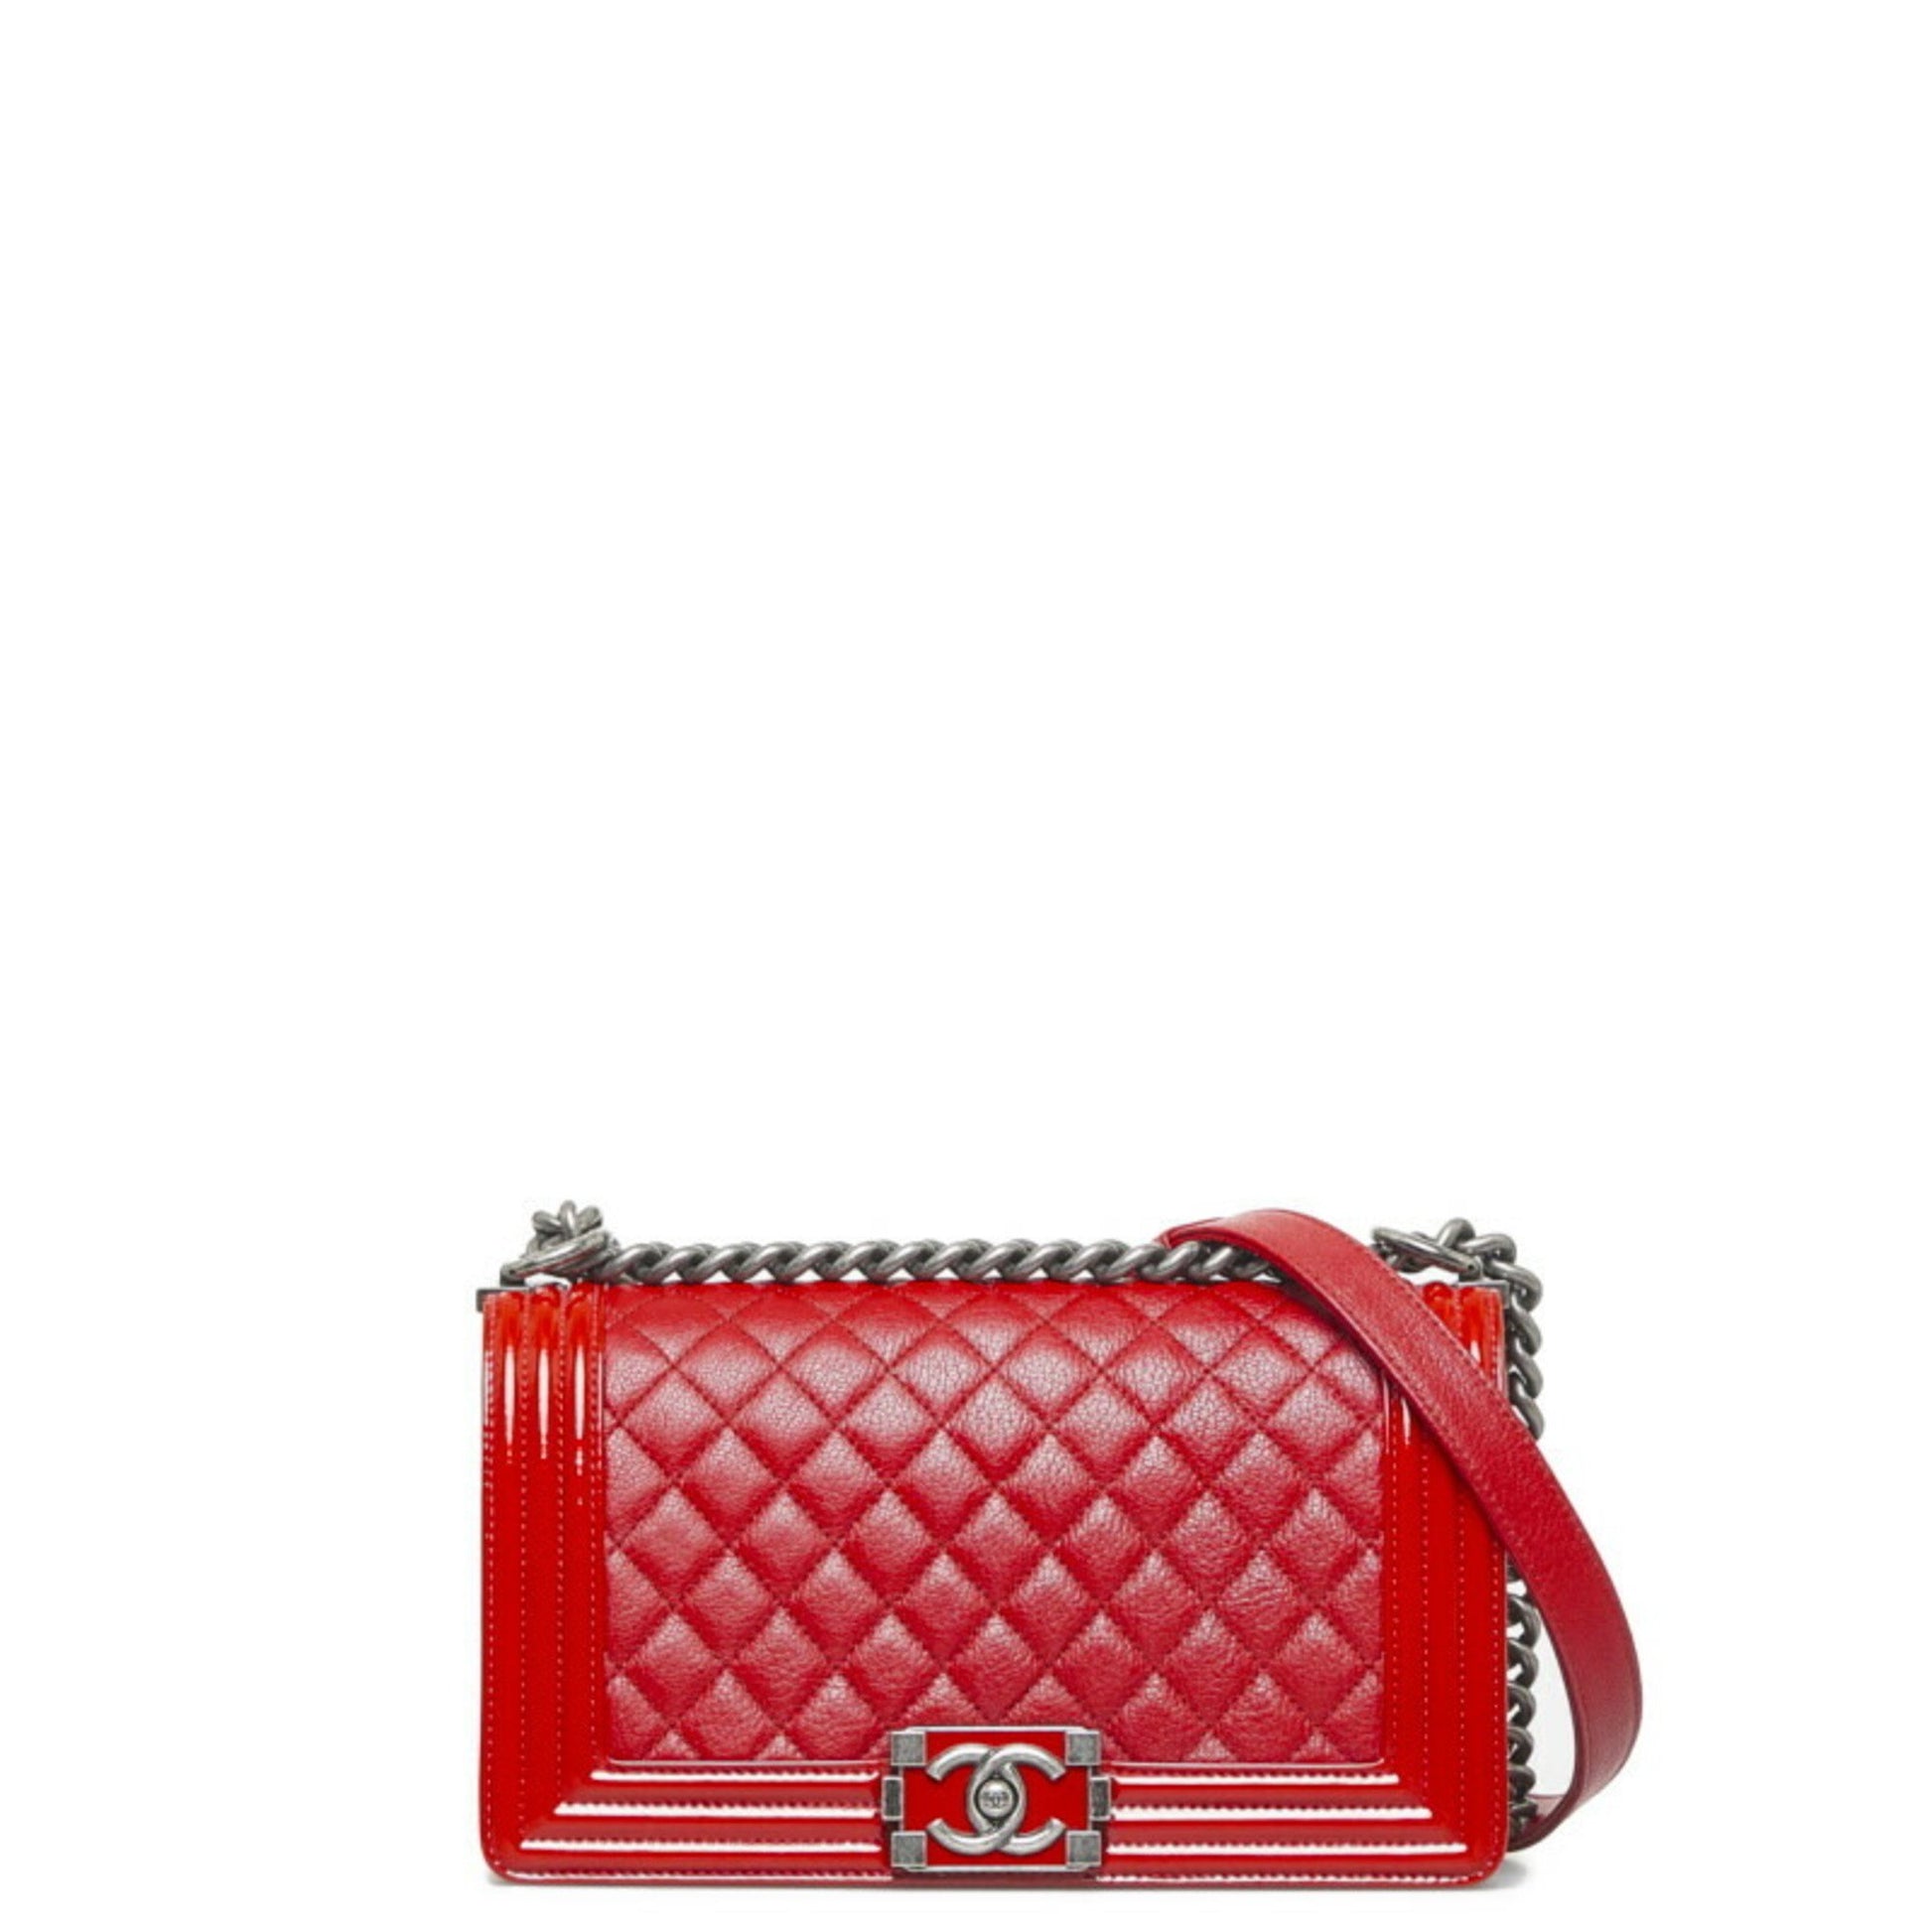 CHANEL Boy Matelasse Coco Mark Chain Shoulder Bag Red Leather Patent W